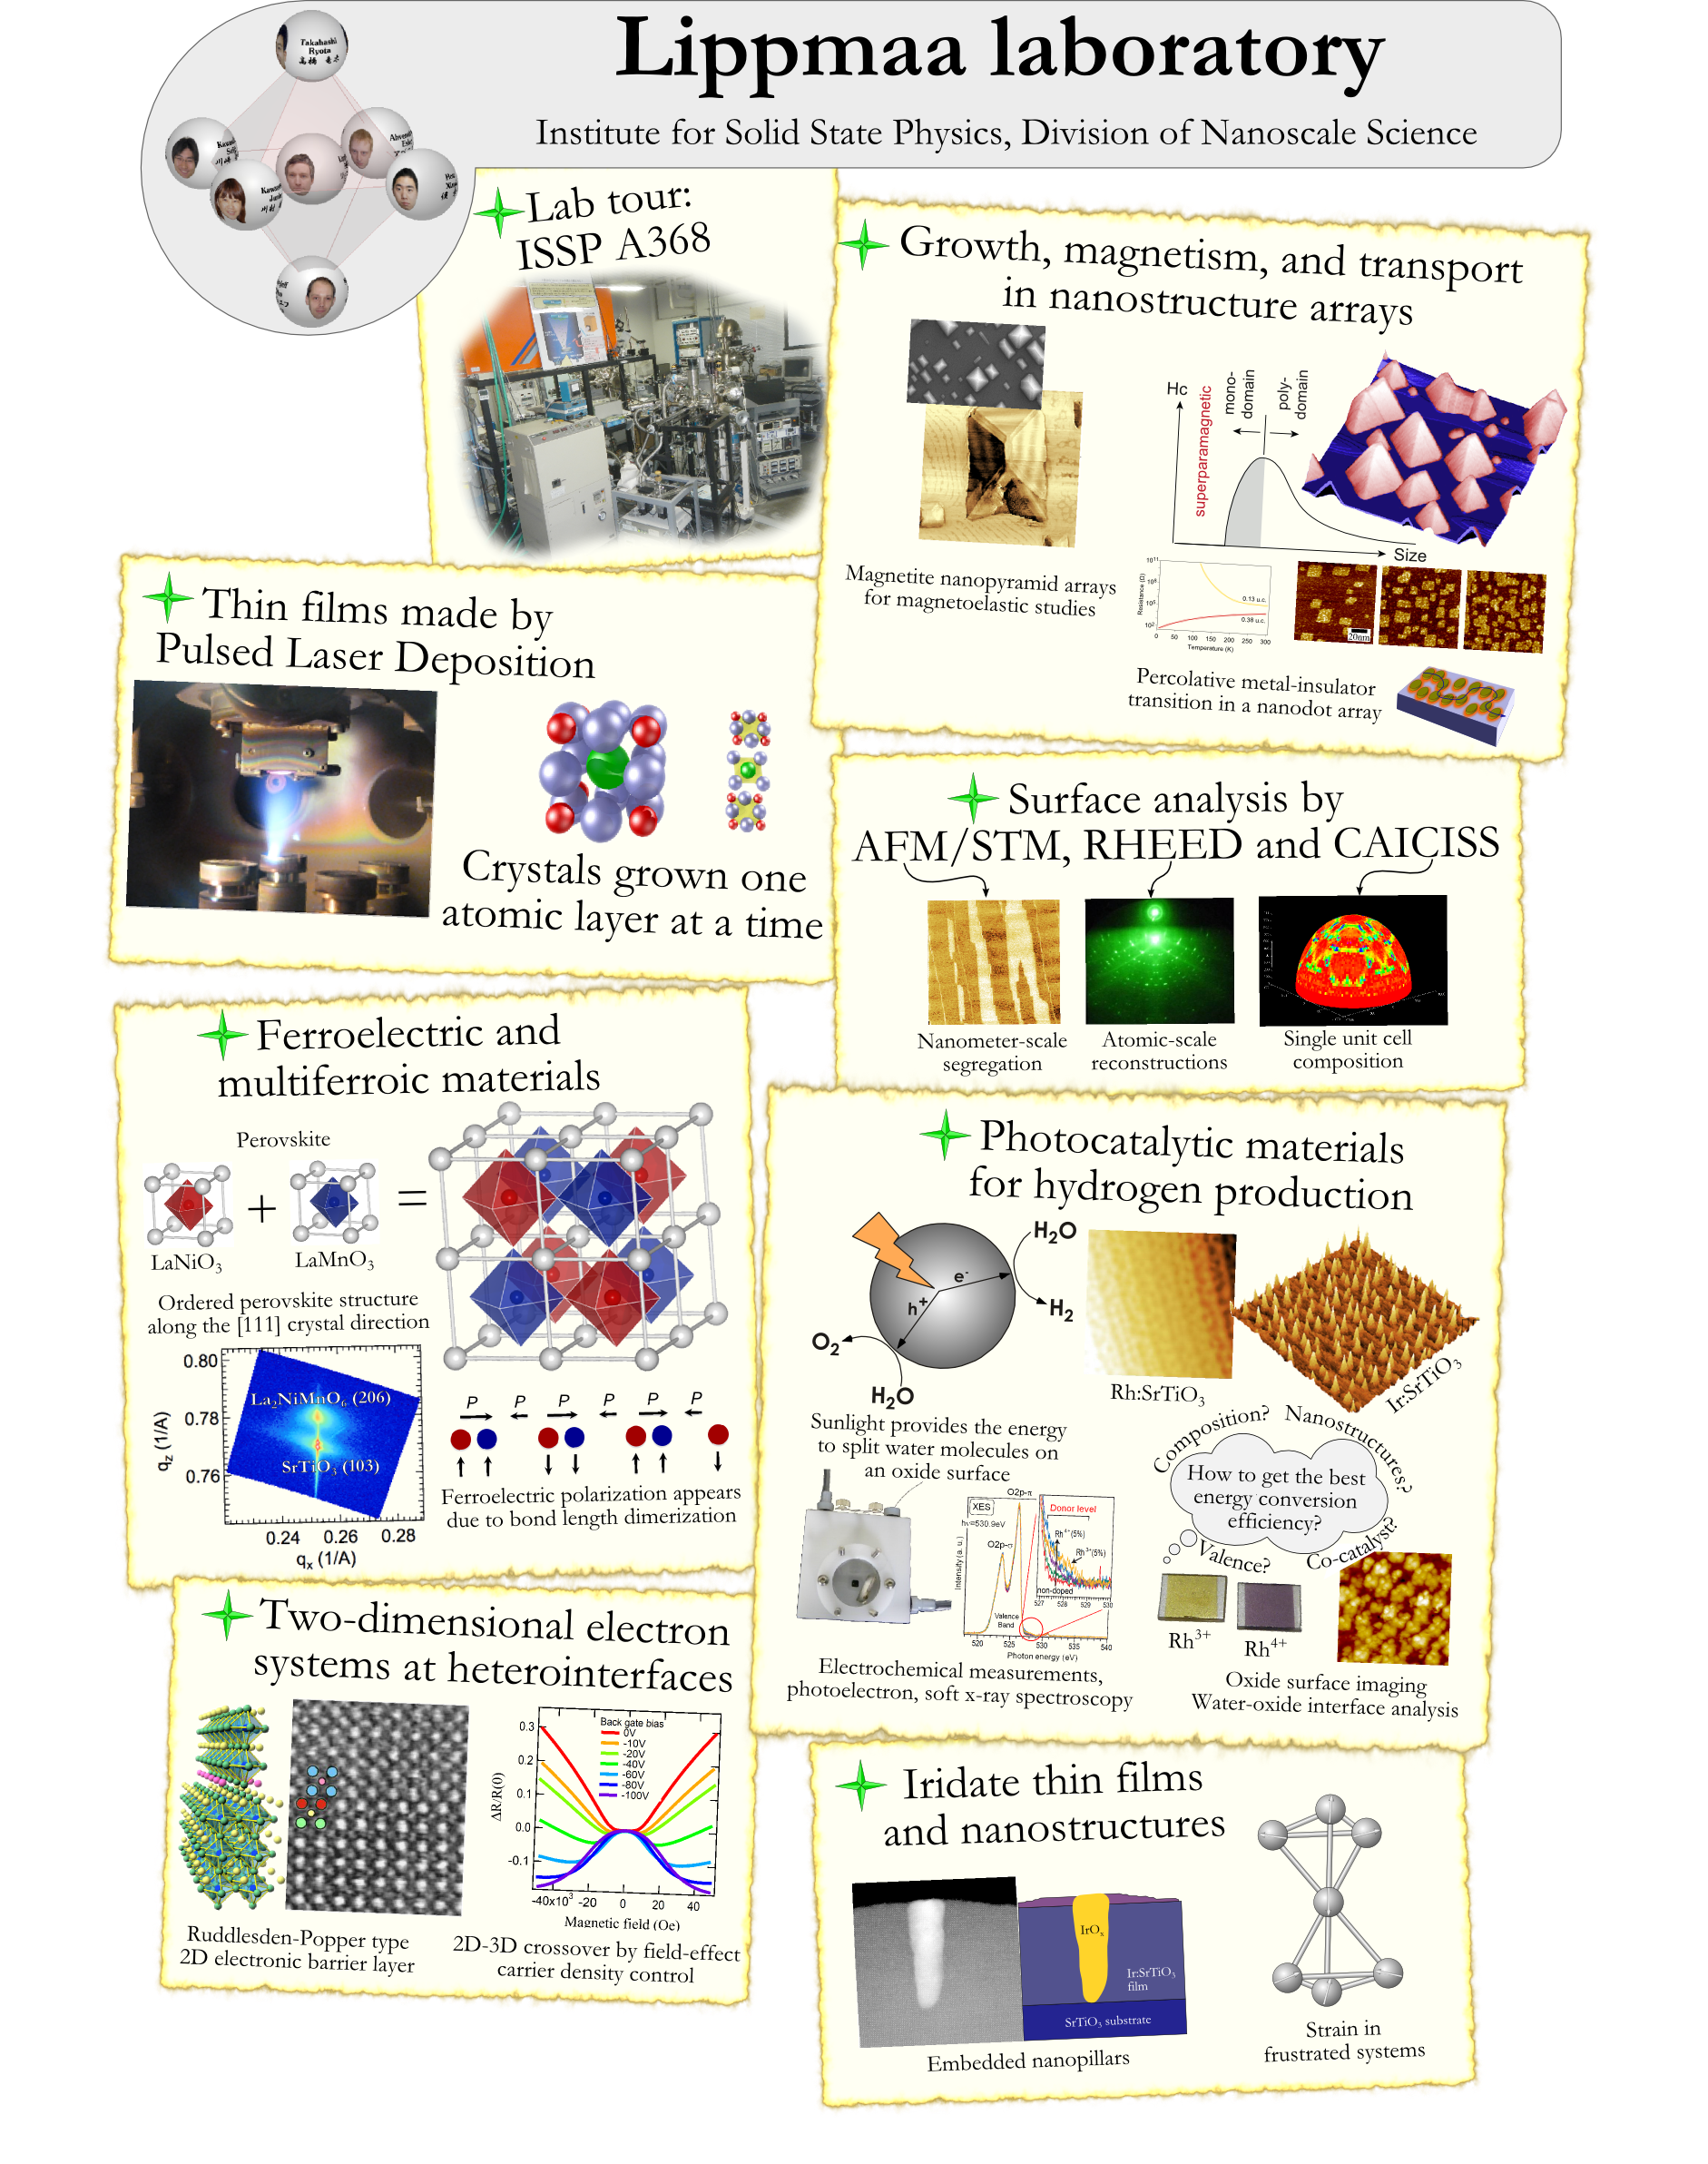 Laboratory introduction poster